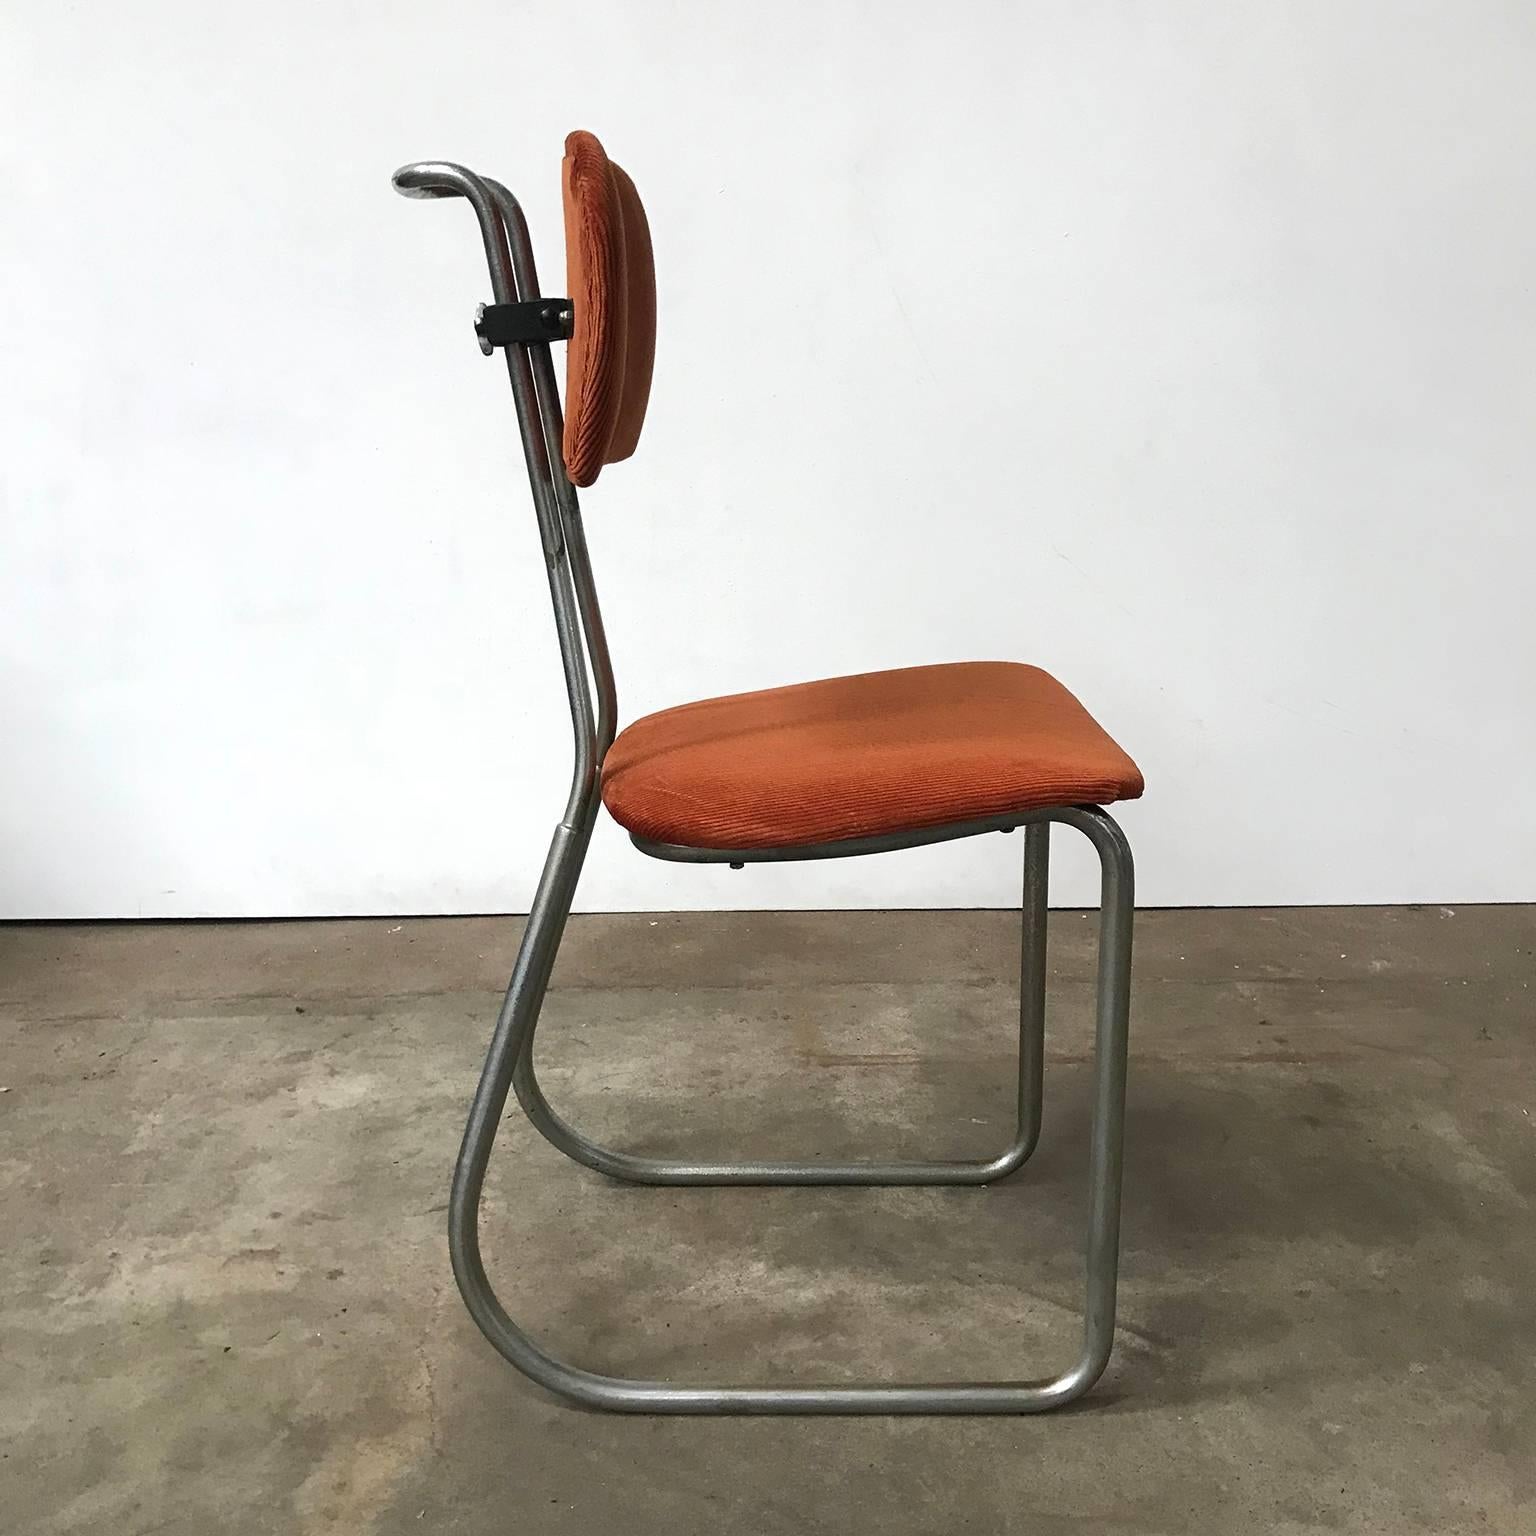 This typing chair in terra brown Manchester upholstery has an elegant chrome base. The seat is not connected to the back. The backrest is adjustable in height as shown on picture #2 and #3. The upholstery is new and in excellent condition. The base